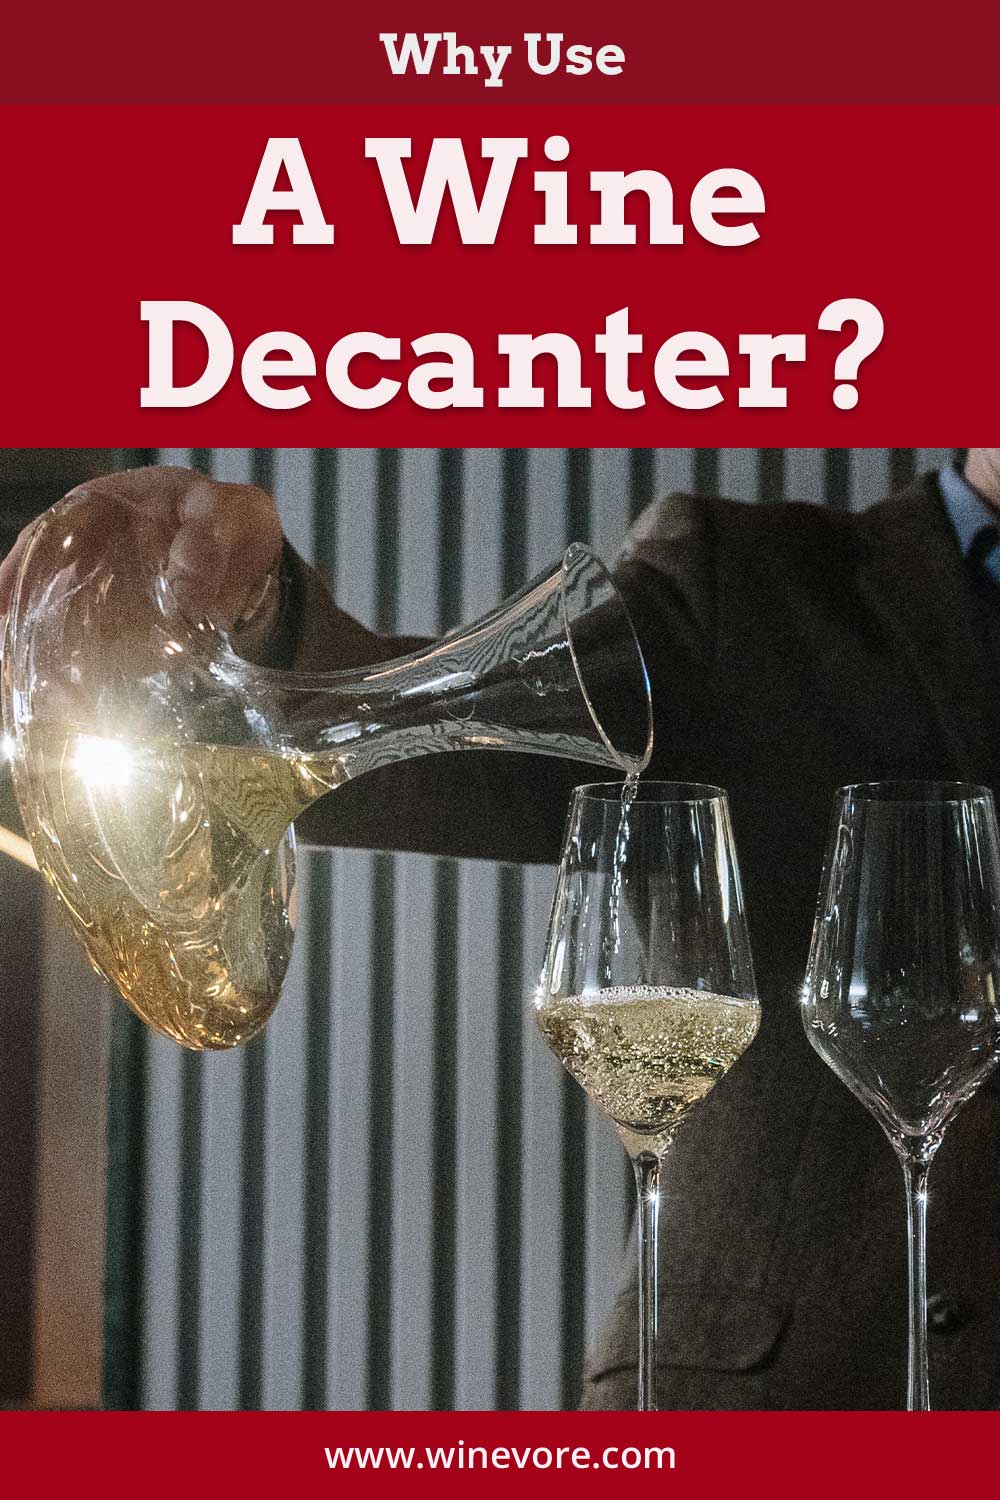 Pouring white wine from a wine decanter into a glass - Why Use A Wine Decanter?